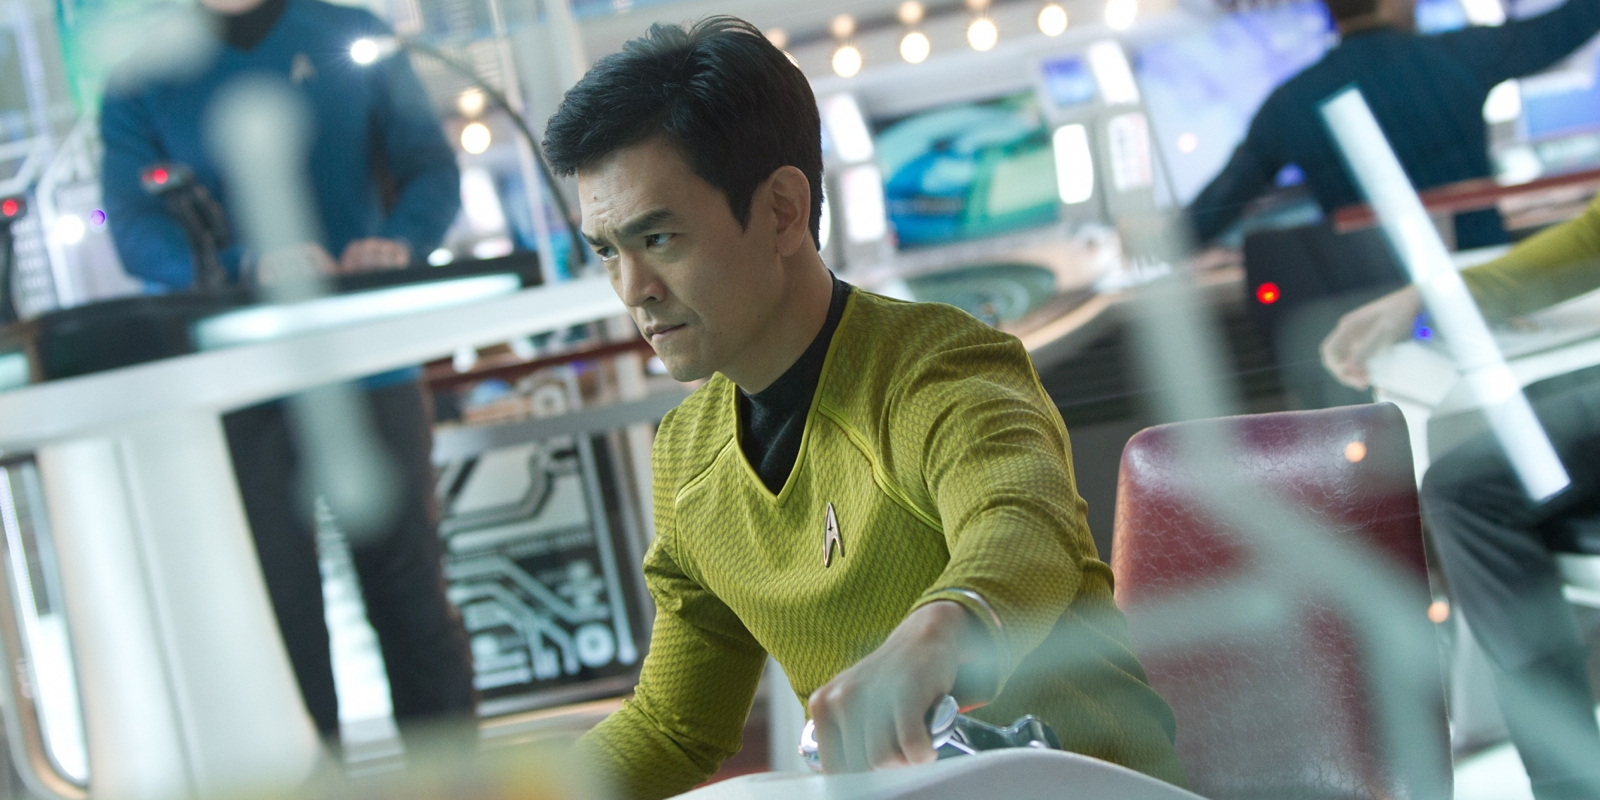 Beyond boldly goes where no Star Trek has gone before